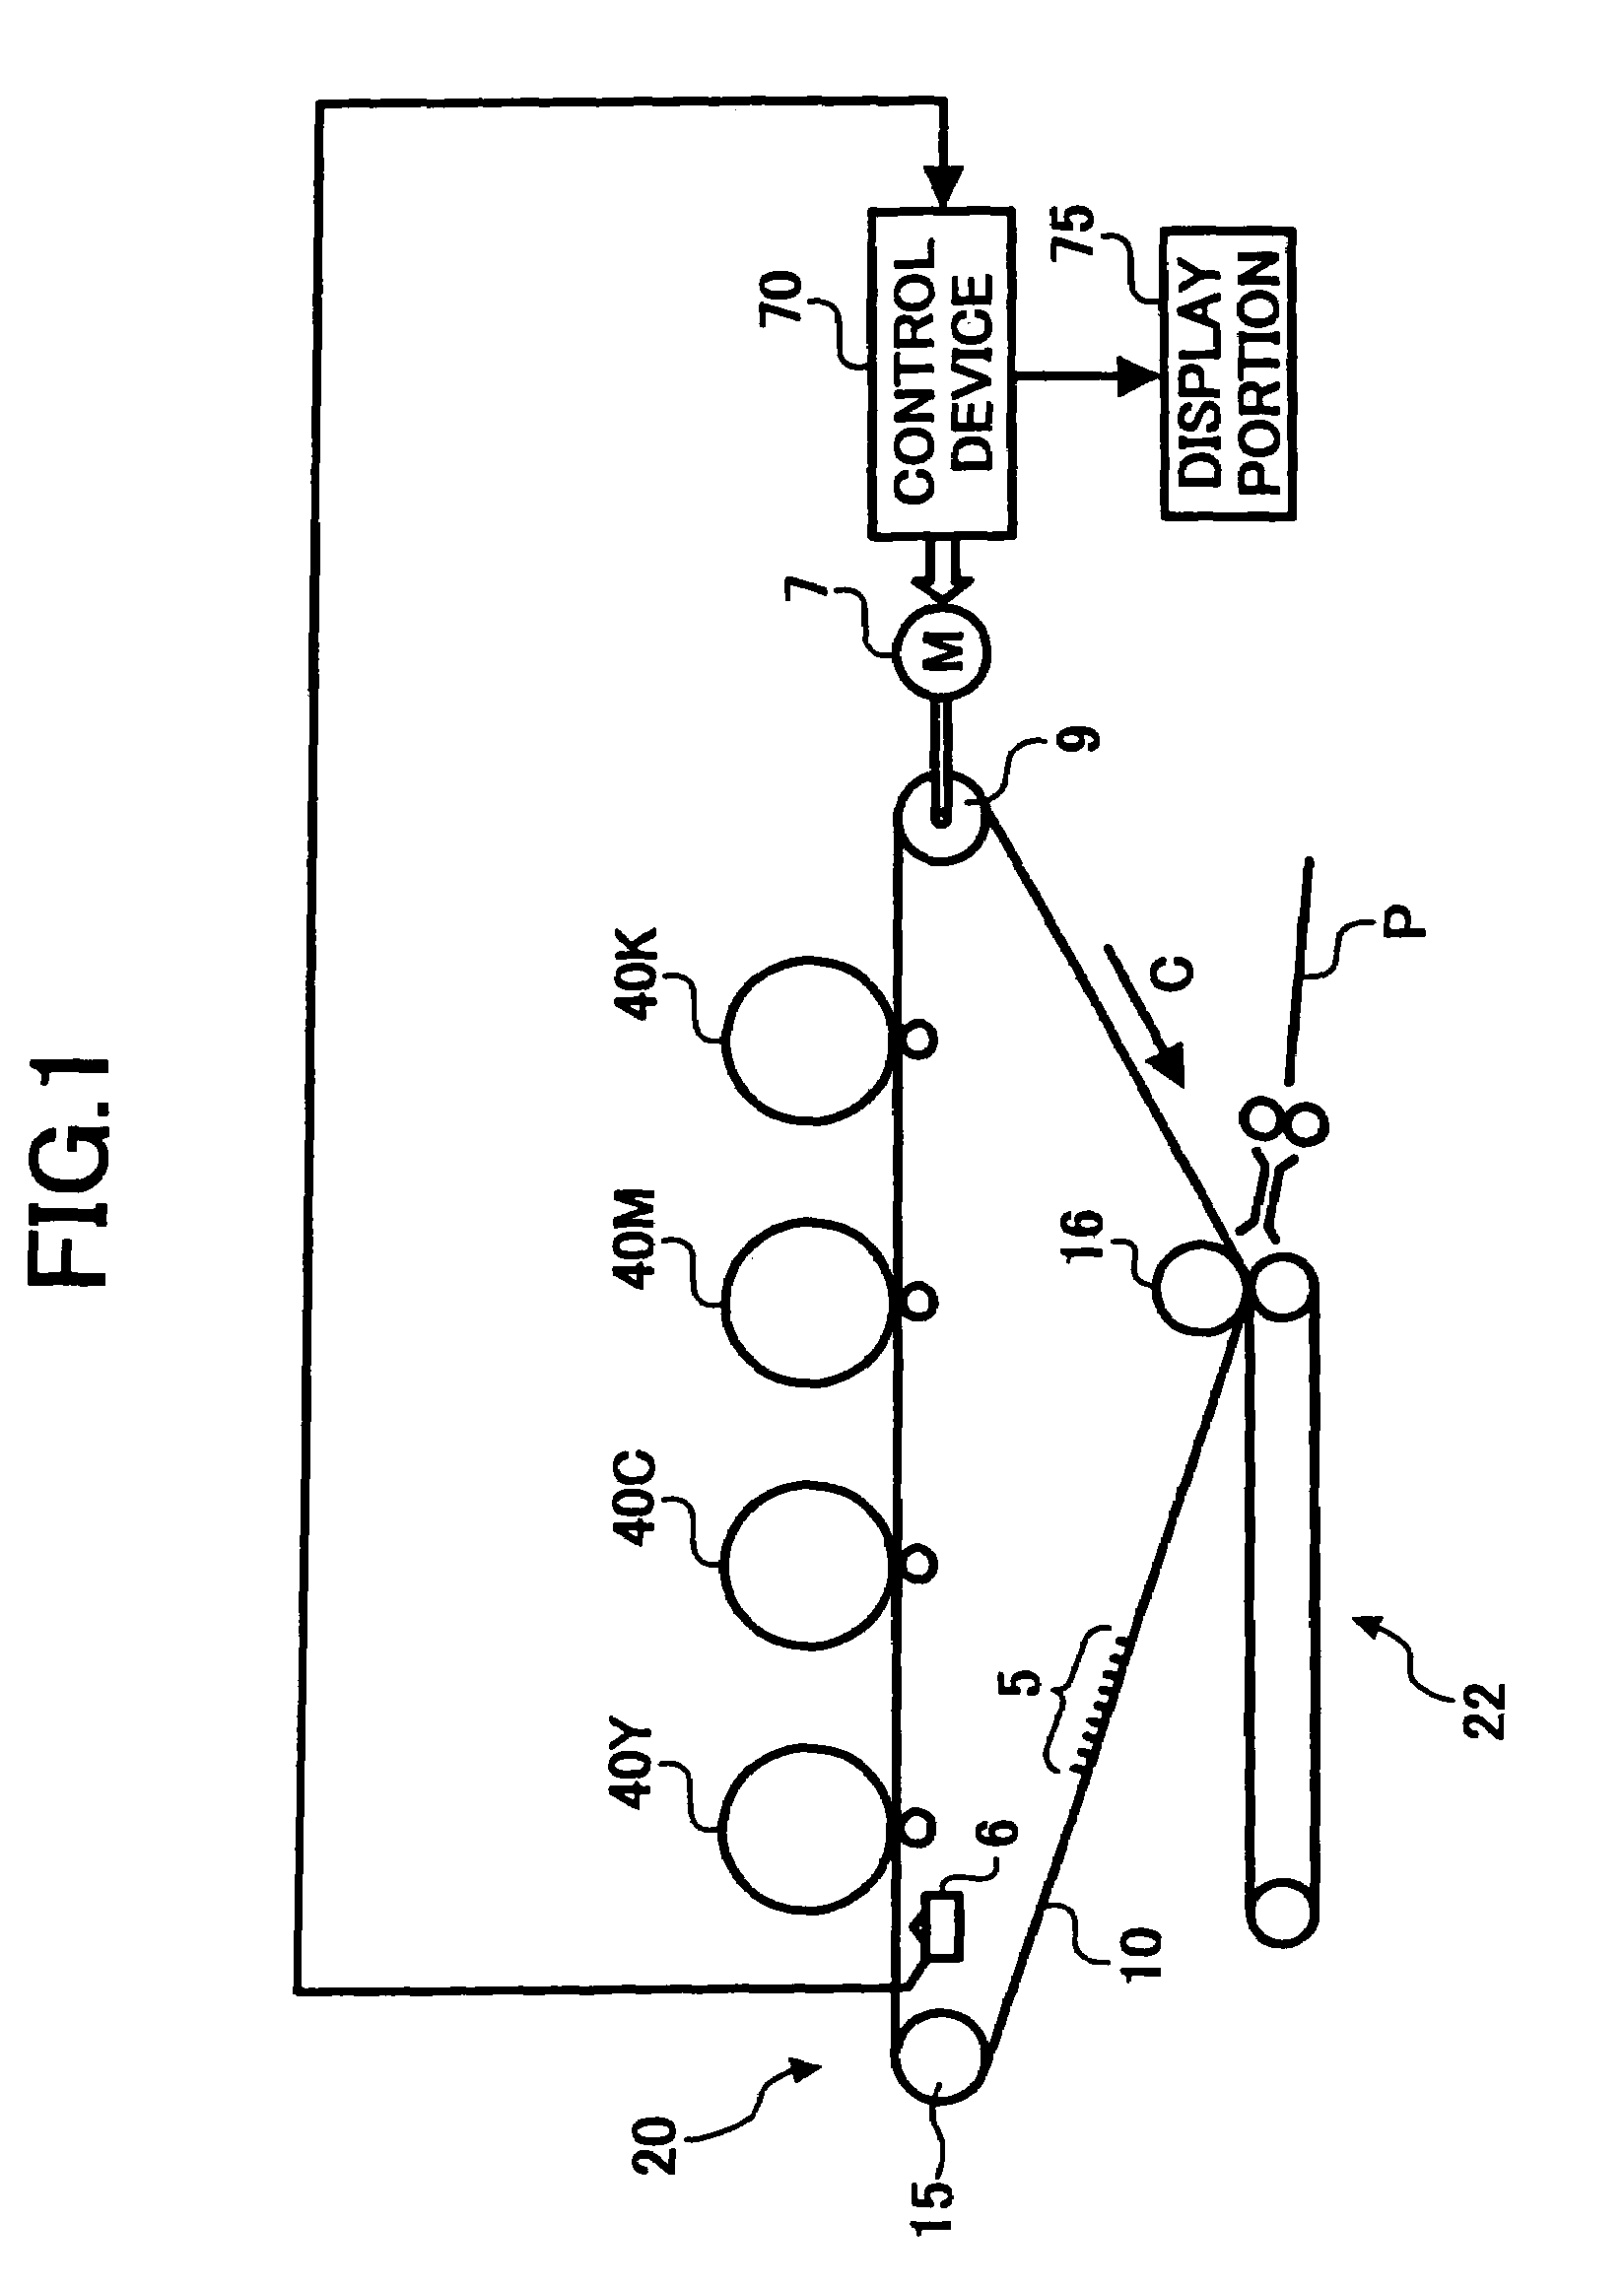 Belt device, image forming apparatus, and method to control belt speed